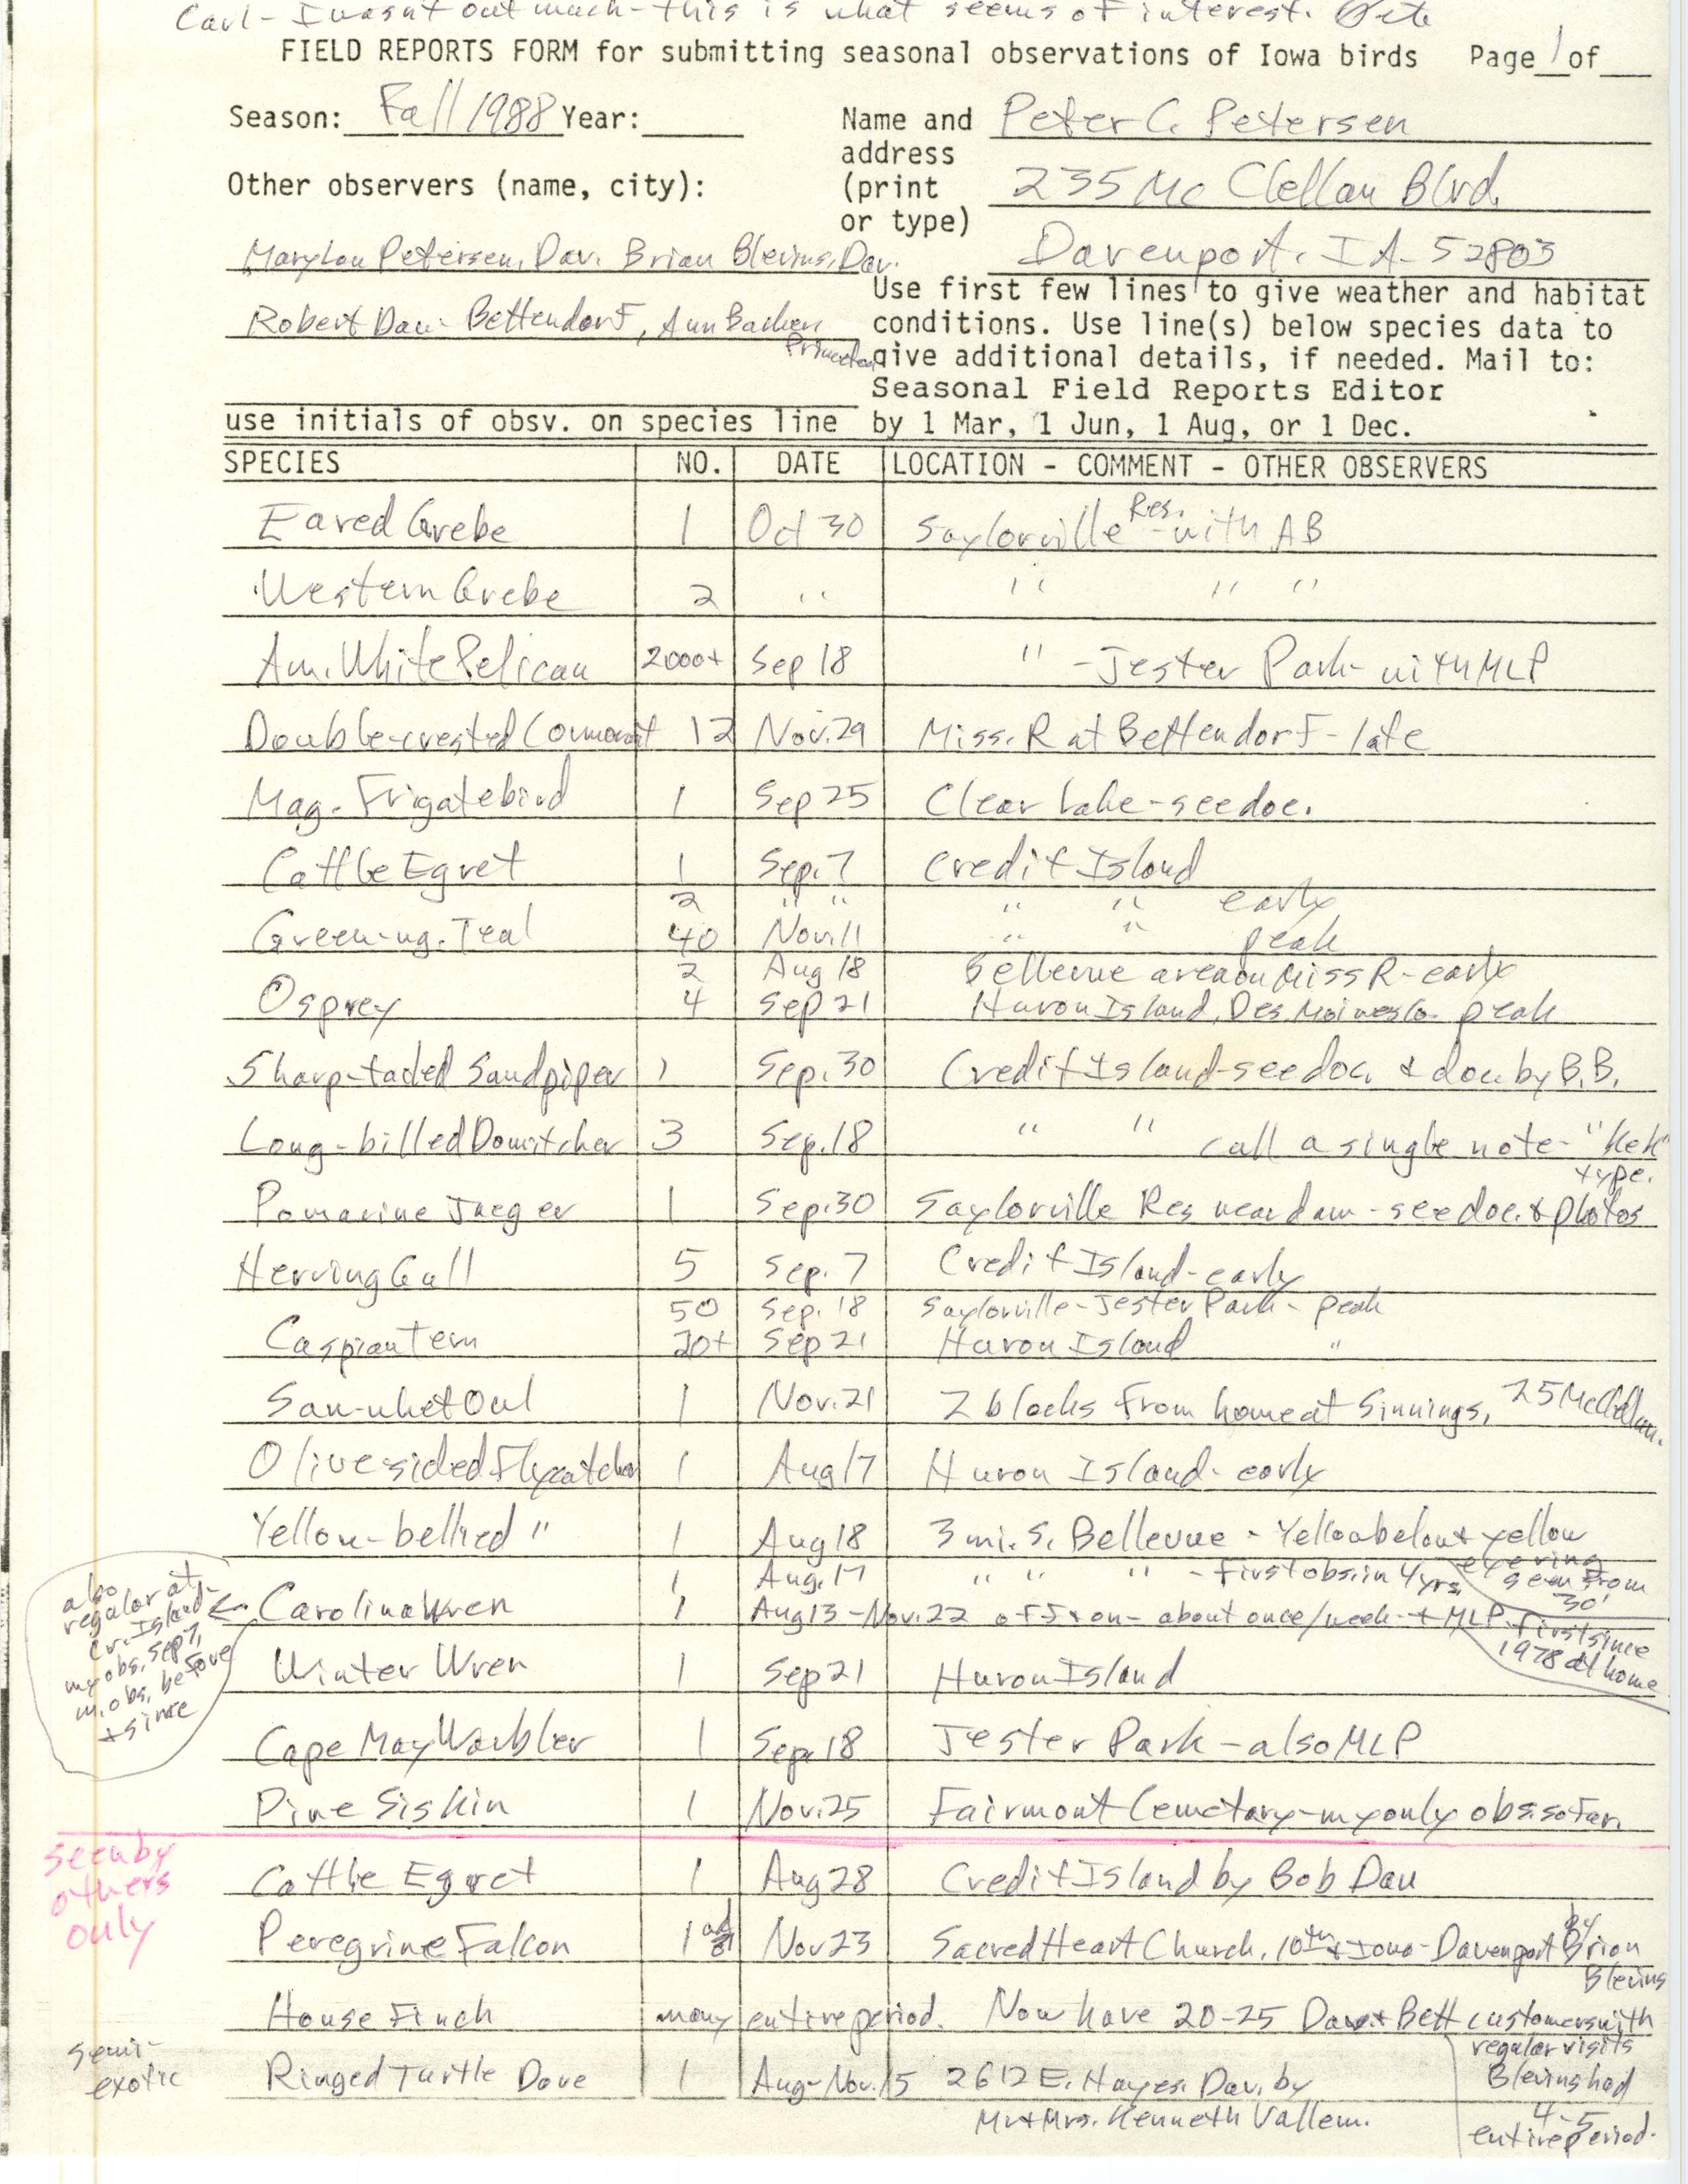 Field reports form for submitting seasonal observations of Iowa birds, Peter C. Petersen, fall 1988